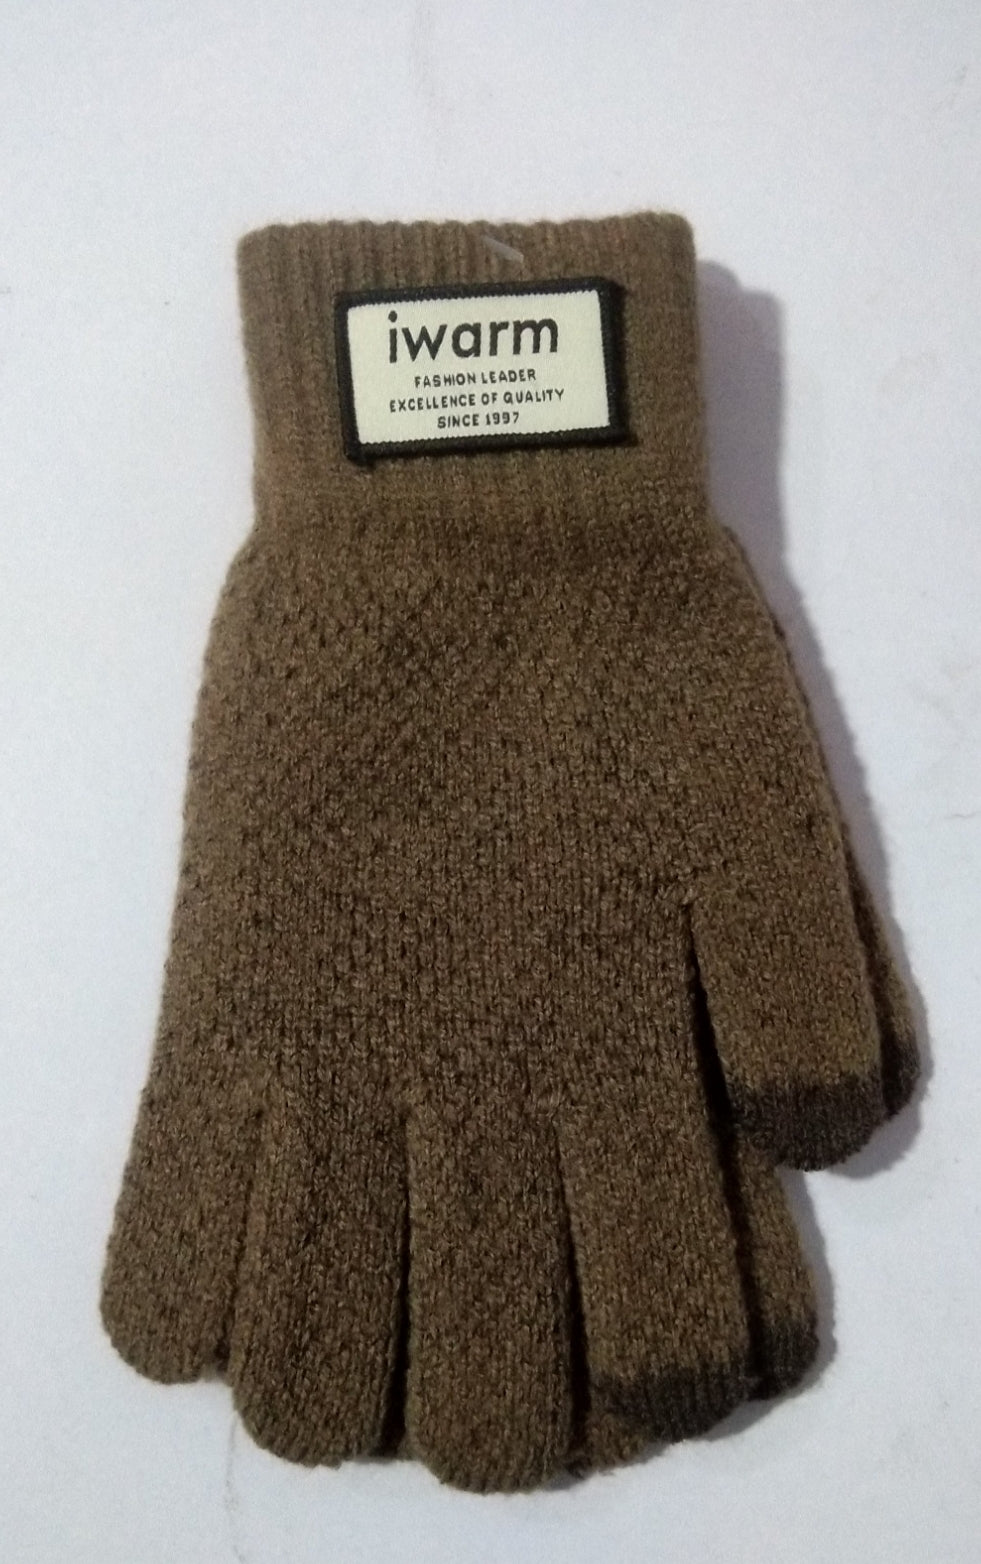 Iwarm knitted touch screen wool gloves